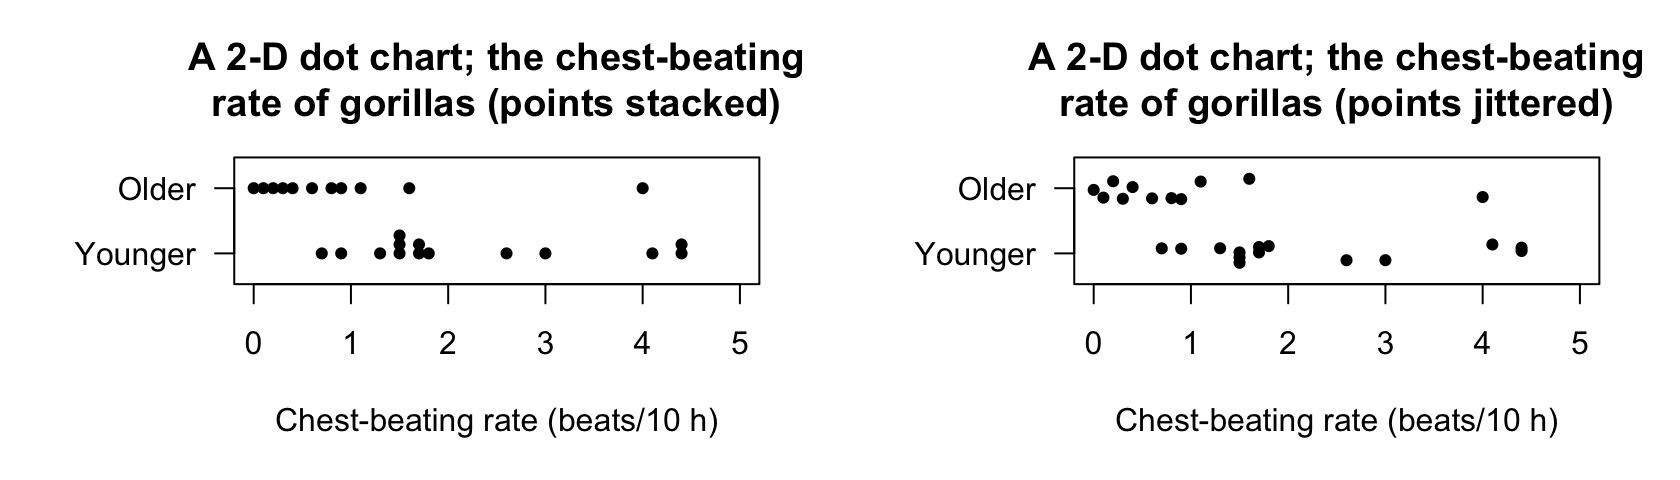 Two variations of a 2-D dot chart for the chest-beating data to avoid overplotting: stacking (left) and jittering (right)